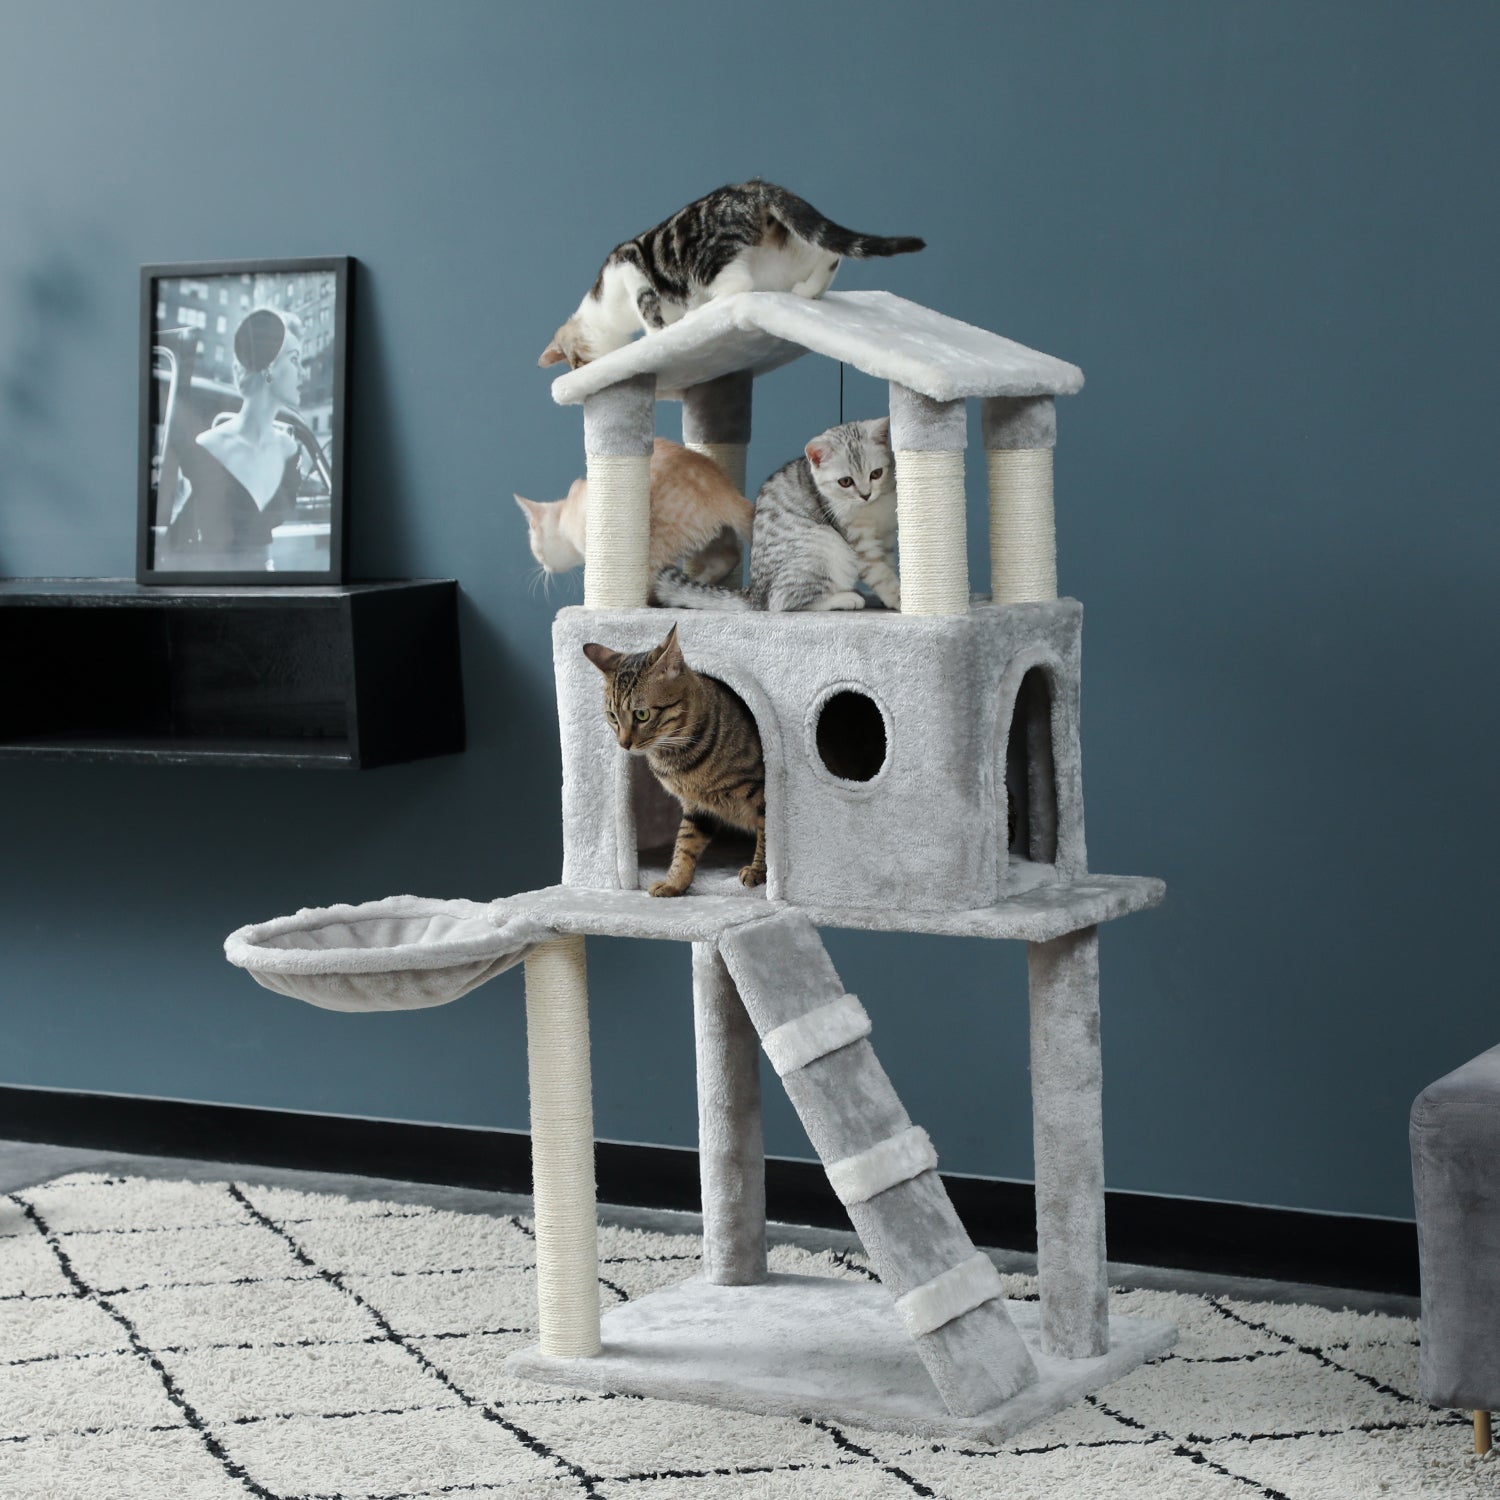 Multi-Level Cat Tree Tower Play House with Sisal Scratching Posts, Deluxe Condo and Plush Basket Bed Hammock Replaceable Dangling Ball